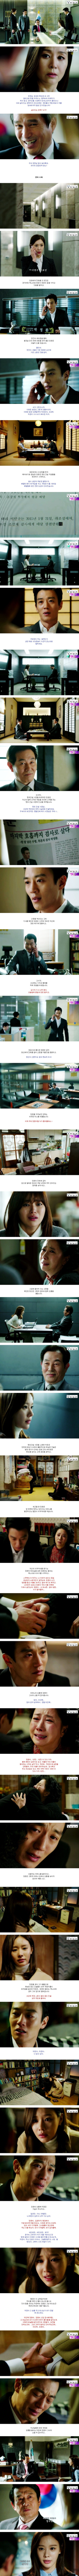 episode 11 captures for the Korean drama 'Punch - Drama'